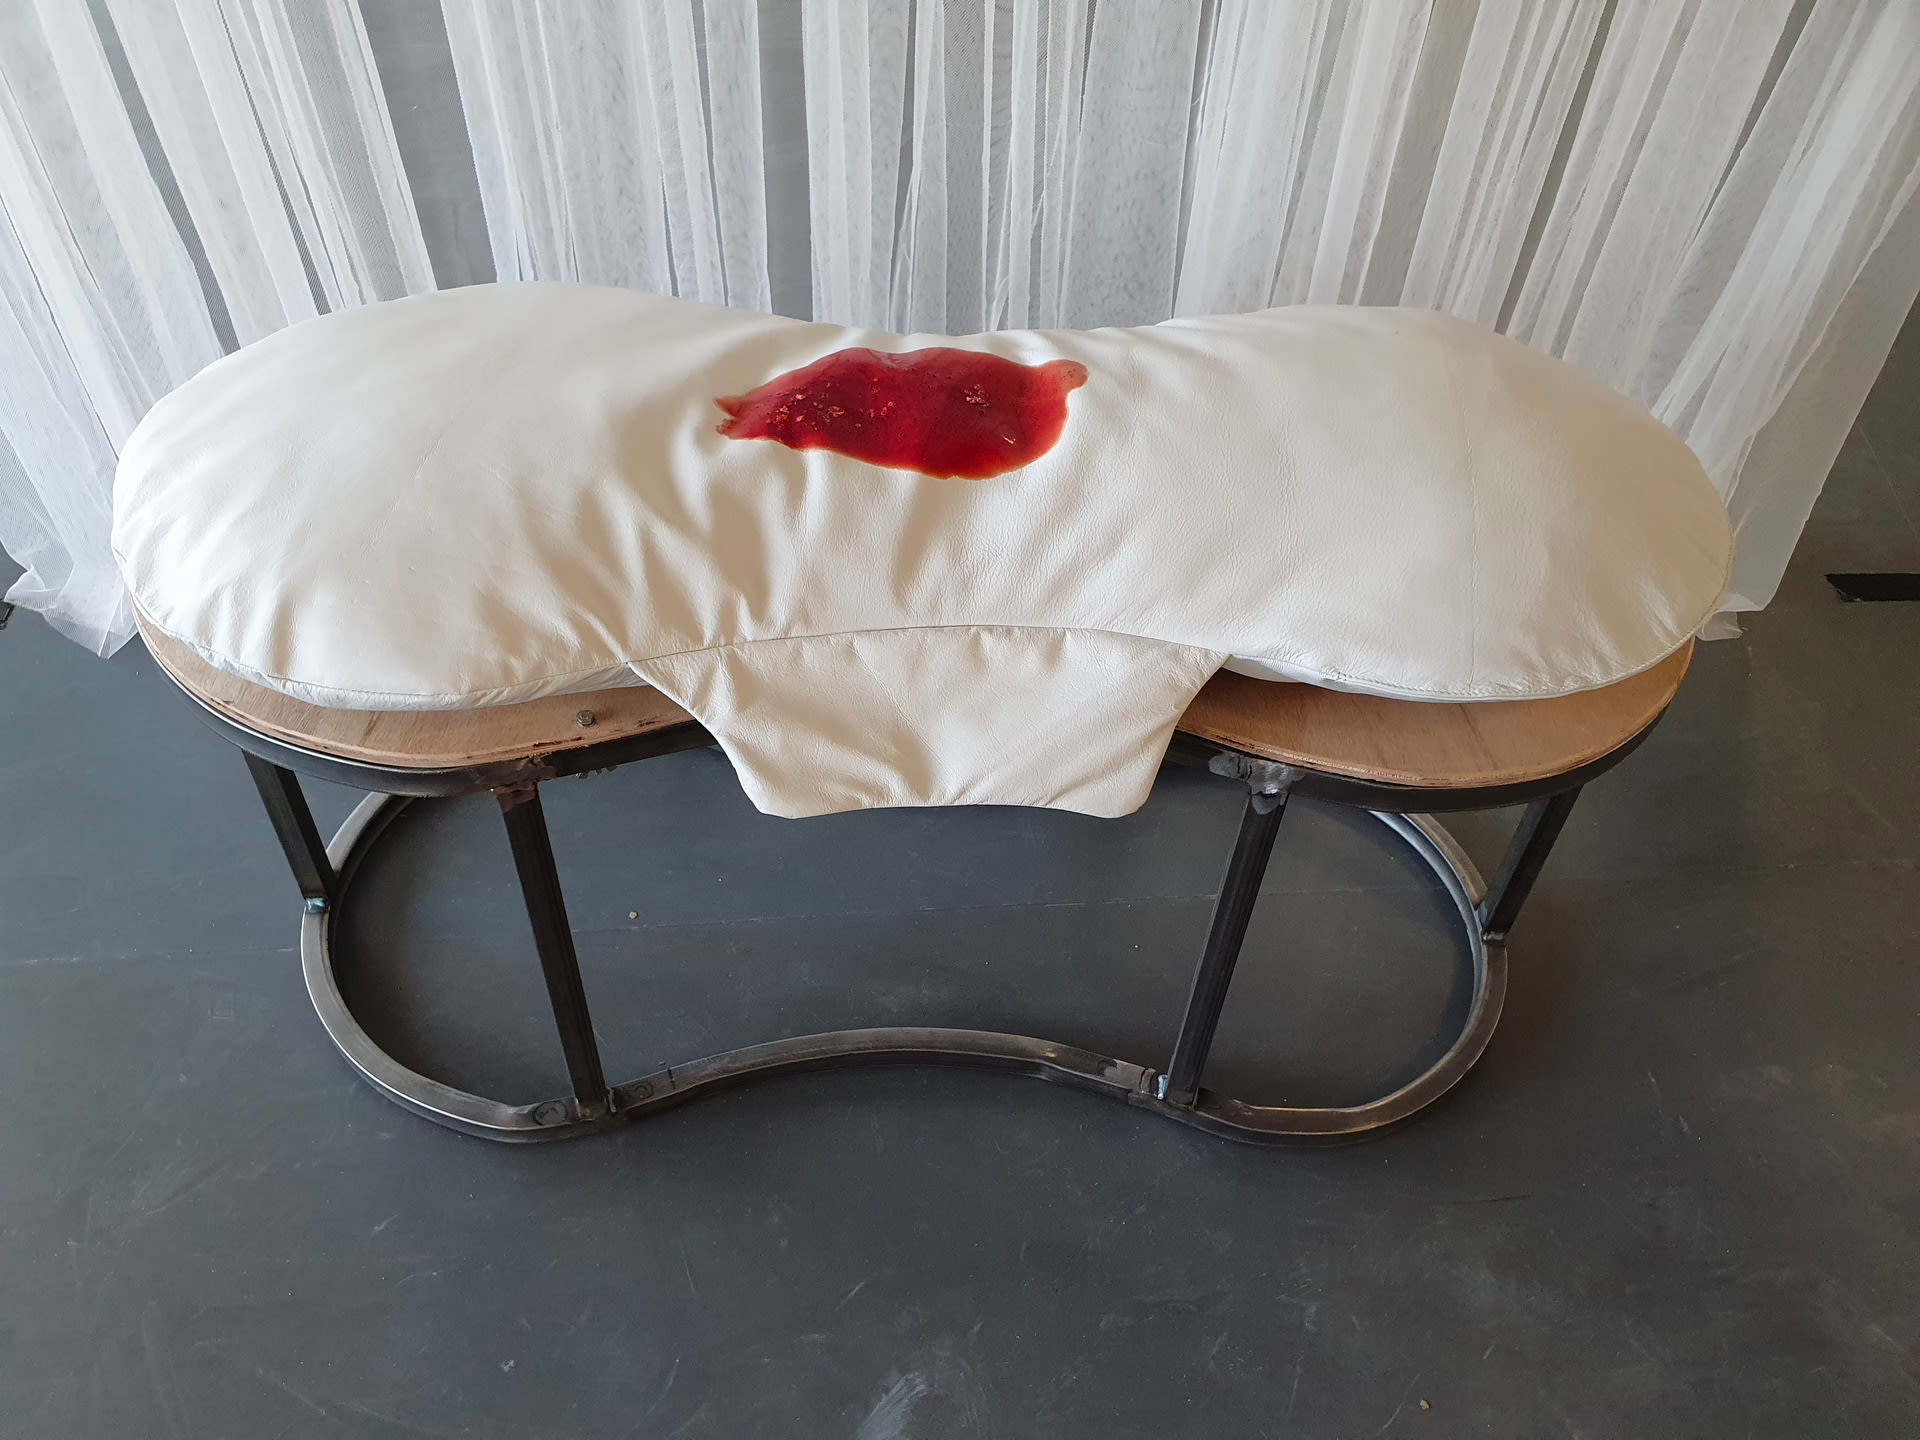 Photograph taken from above and in front of what looks like a curved, stool seat with a metal base, with a cream cushion shaped like a sanitary towel, and stained with red in the middle on top.